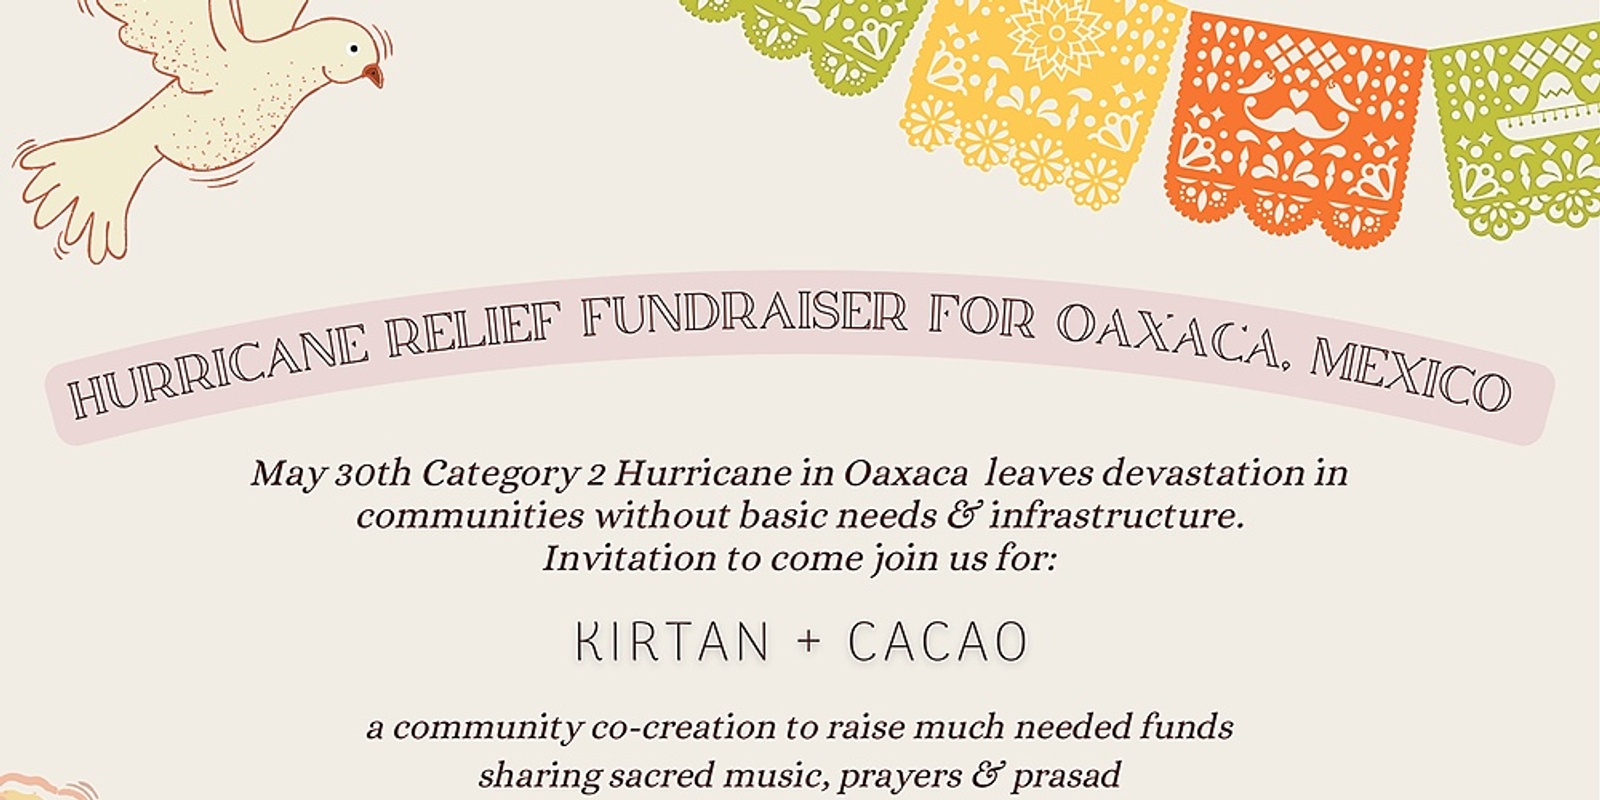 Banner image for HURRICANE RELIEF FUNDRAISER for Oaxaca, MEXICO 